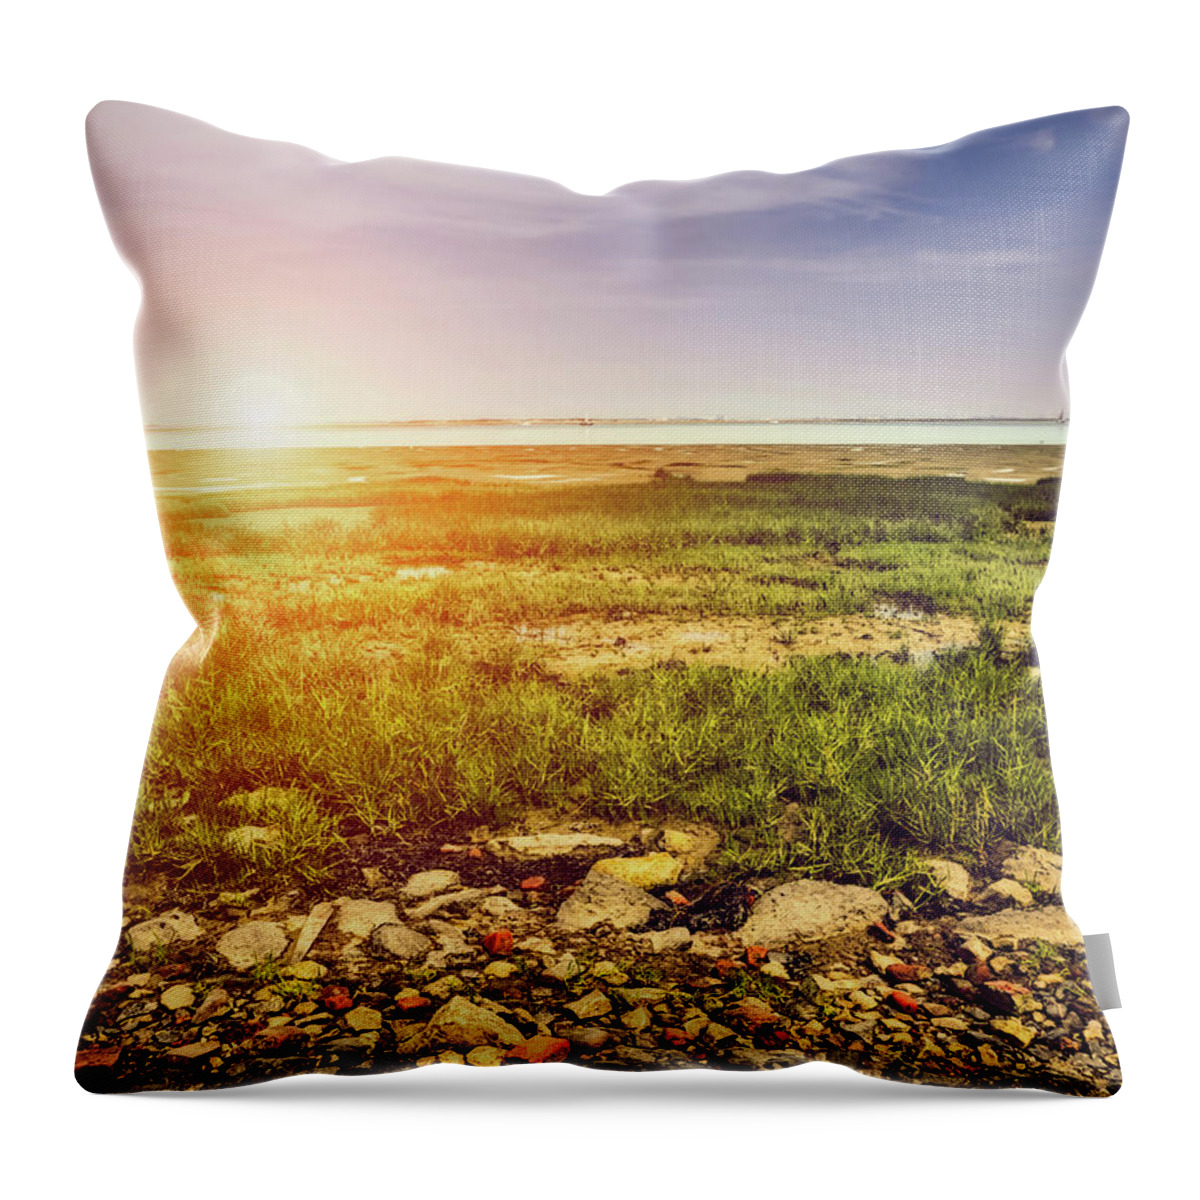 Marshland Throw Pillow featuring the photograph Marshland by Wim Lanclus